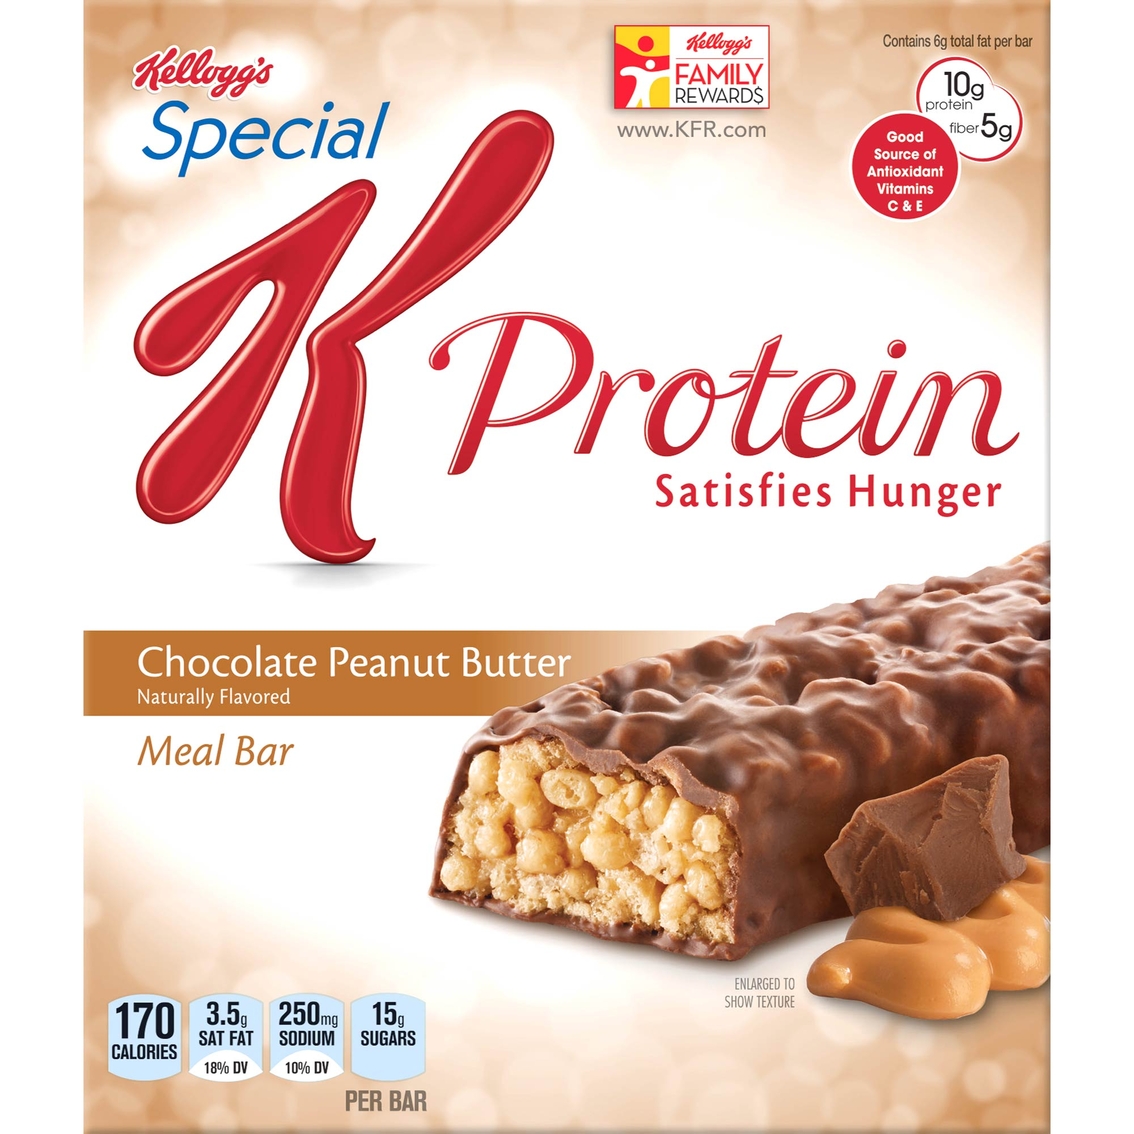 Special K Meal Bar 6 pk. - Image 1 of 2